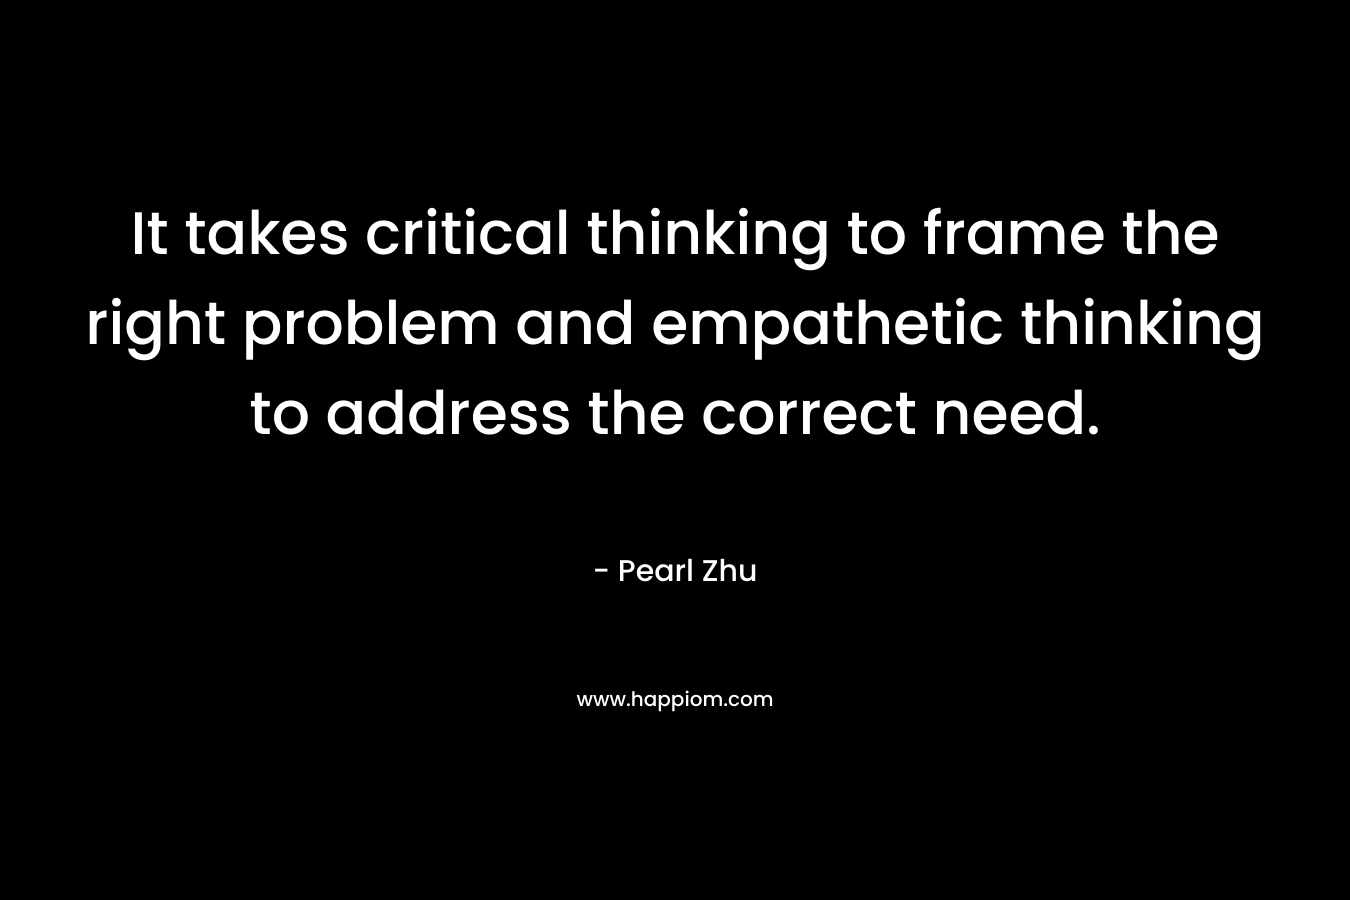 It takes critical thinking to frame the right problem and empathetic thinking to address the correct need.